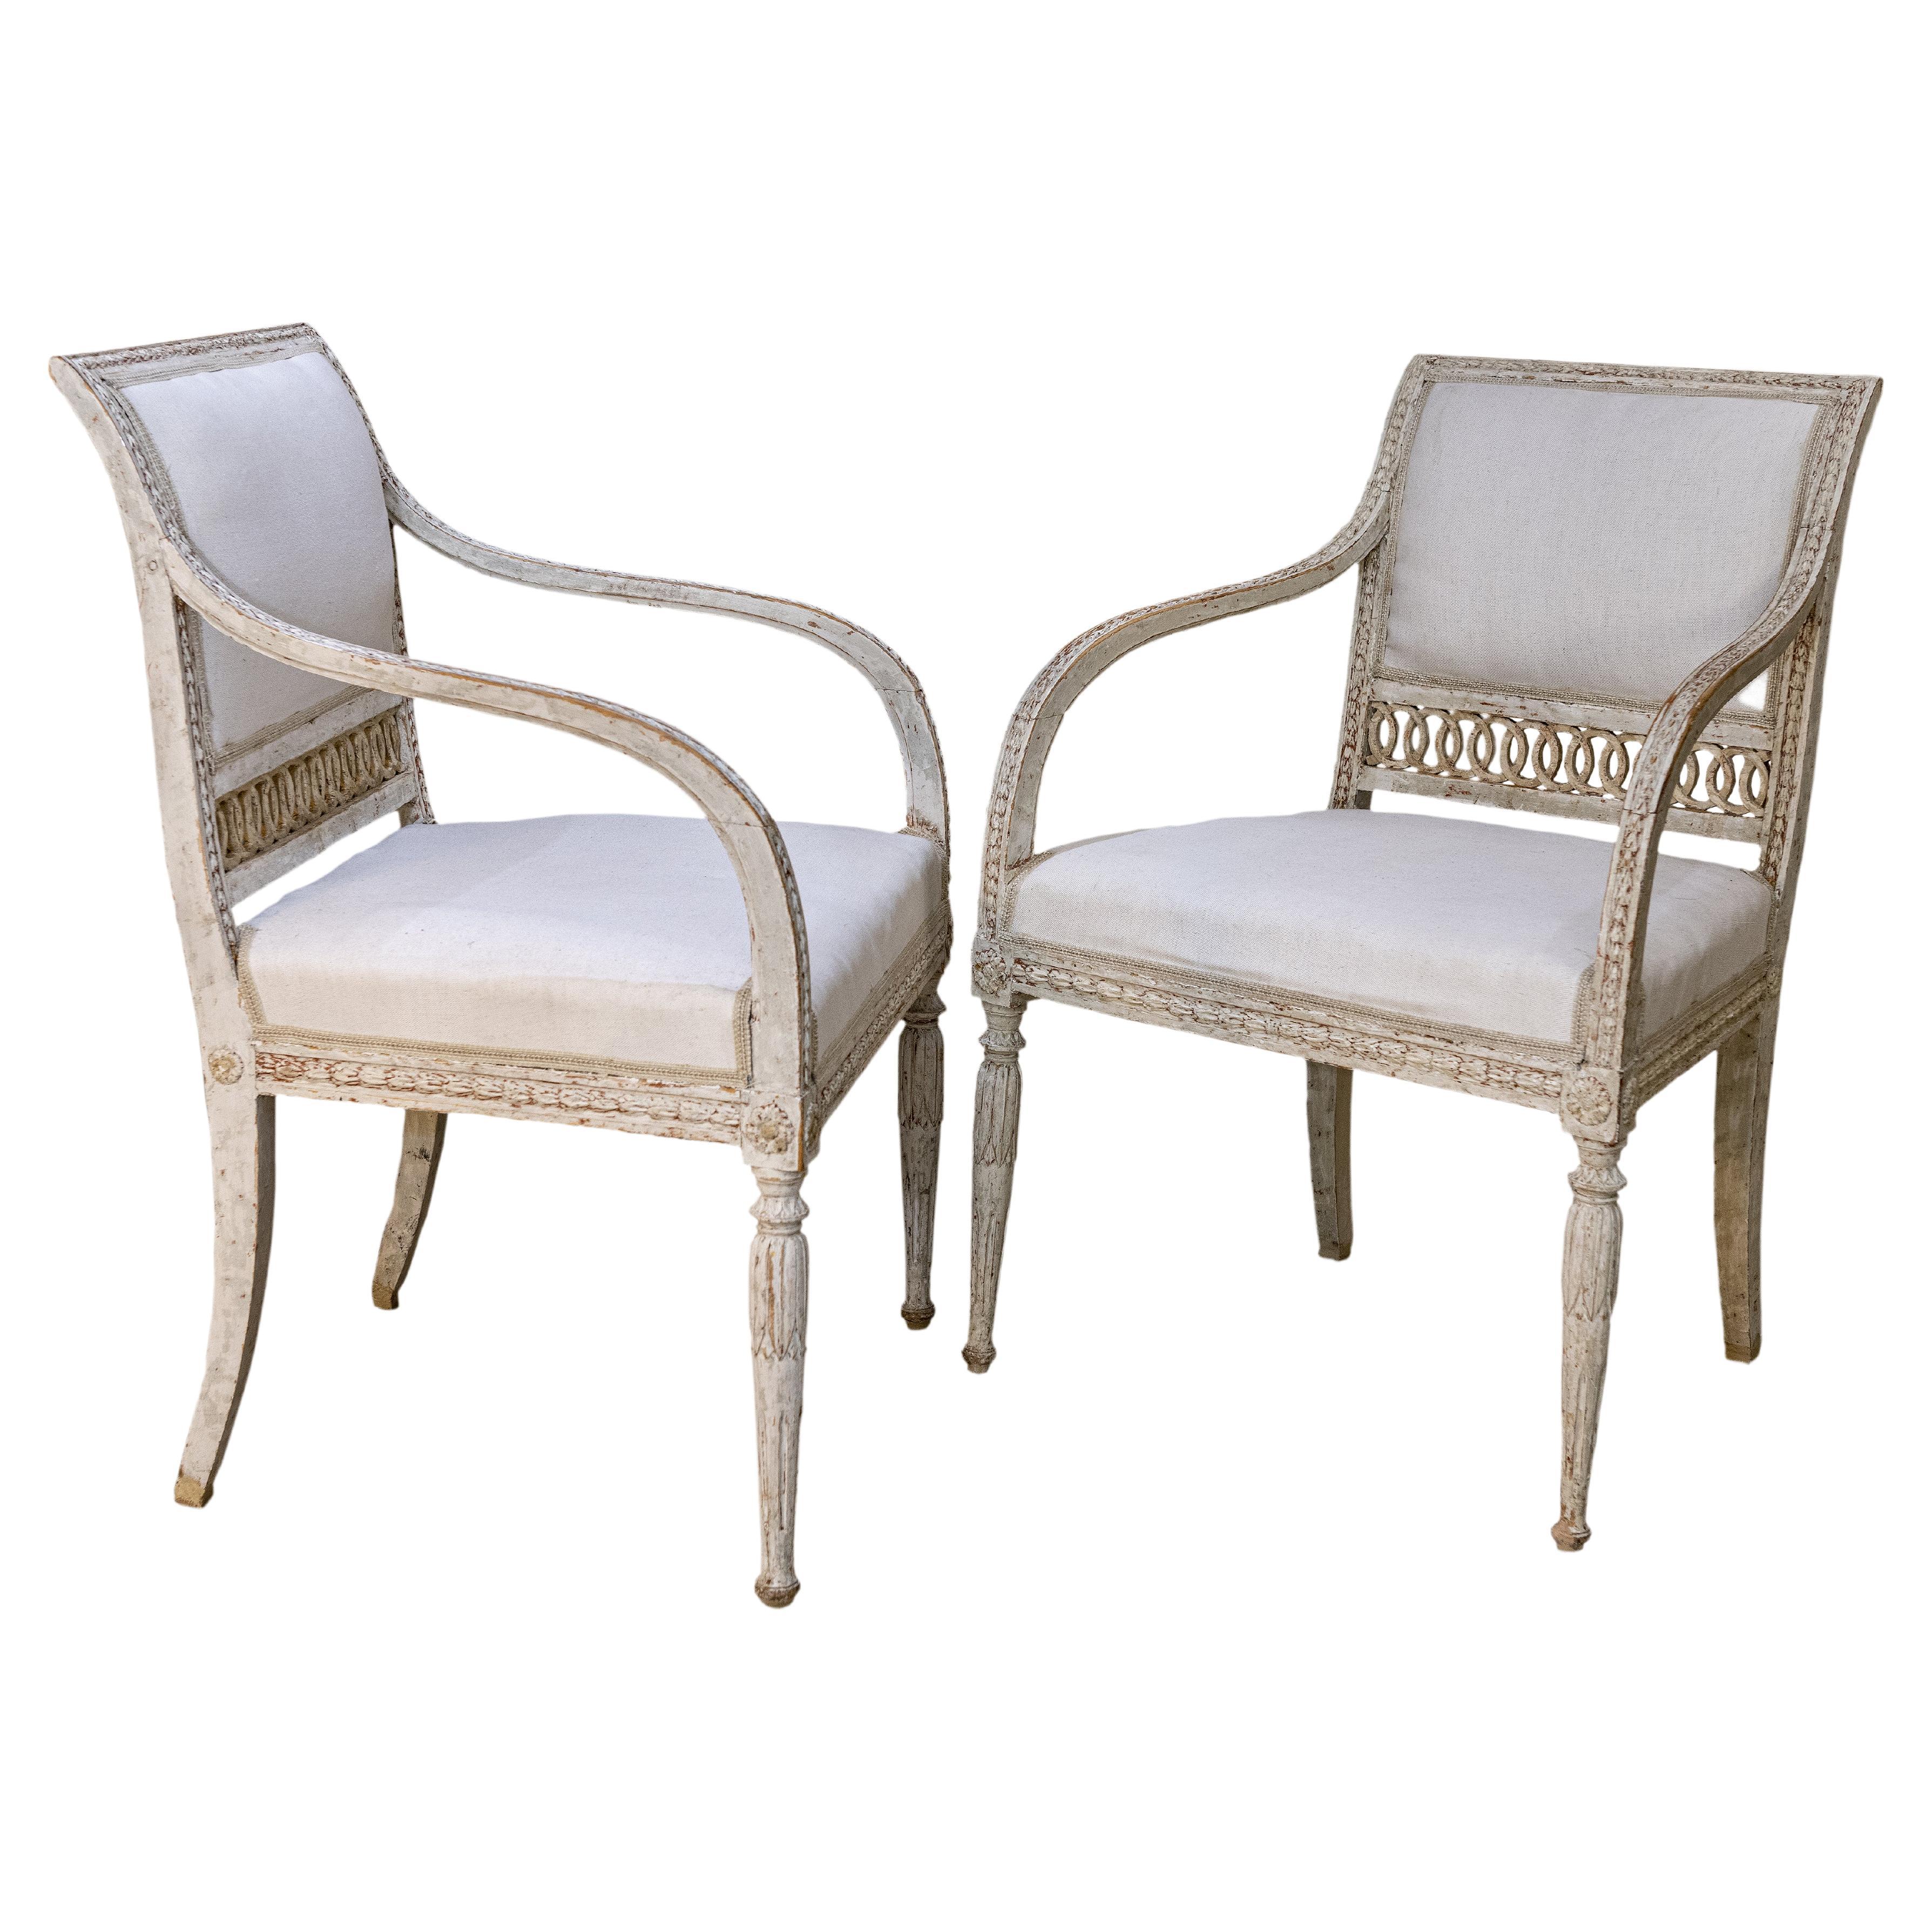 Pair of Stockholm Made Gustavian Painted and Gilt Armchairs